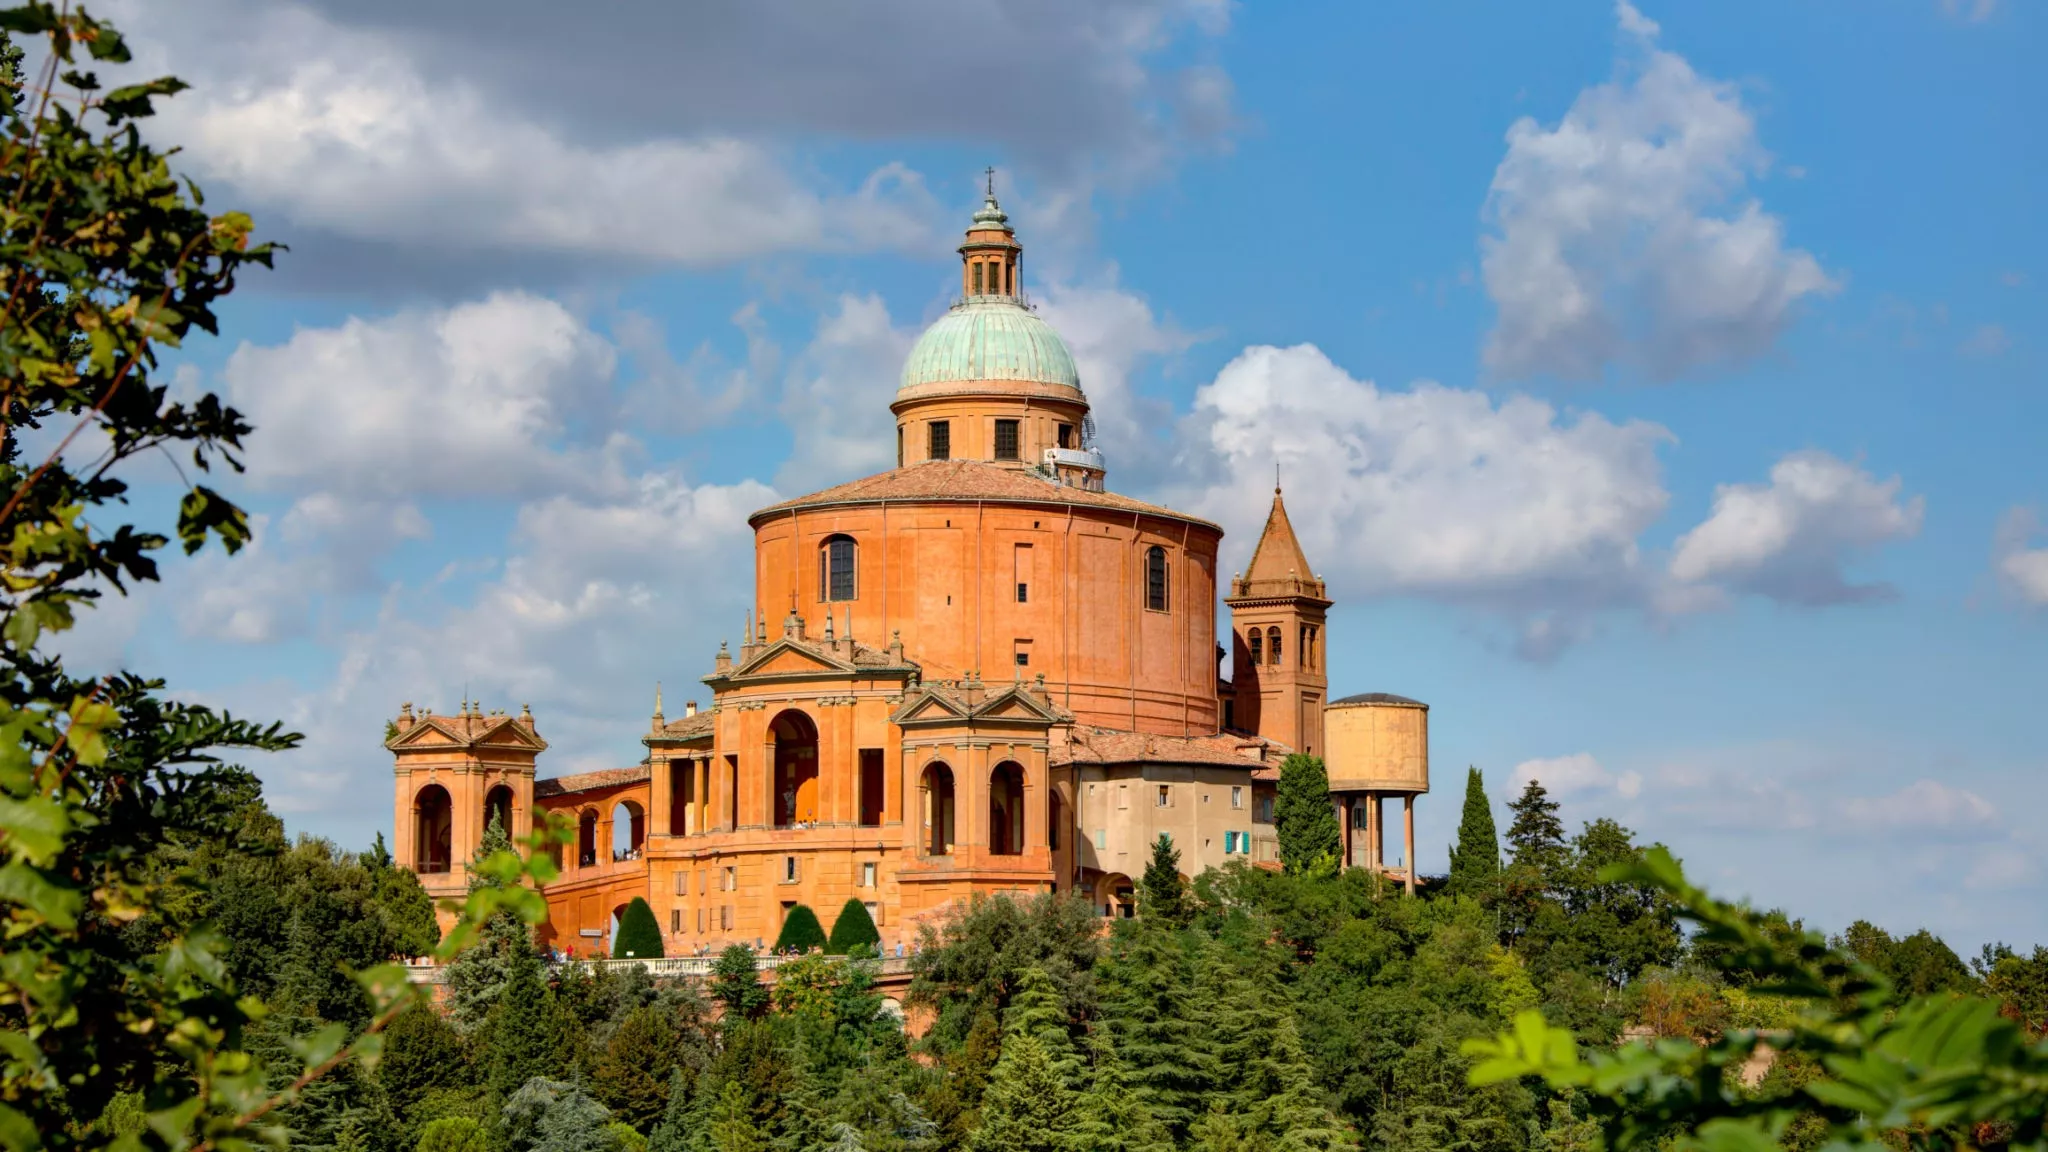 Madonna di San Luca in Italy, Europe | Architecture - Rated 4